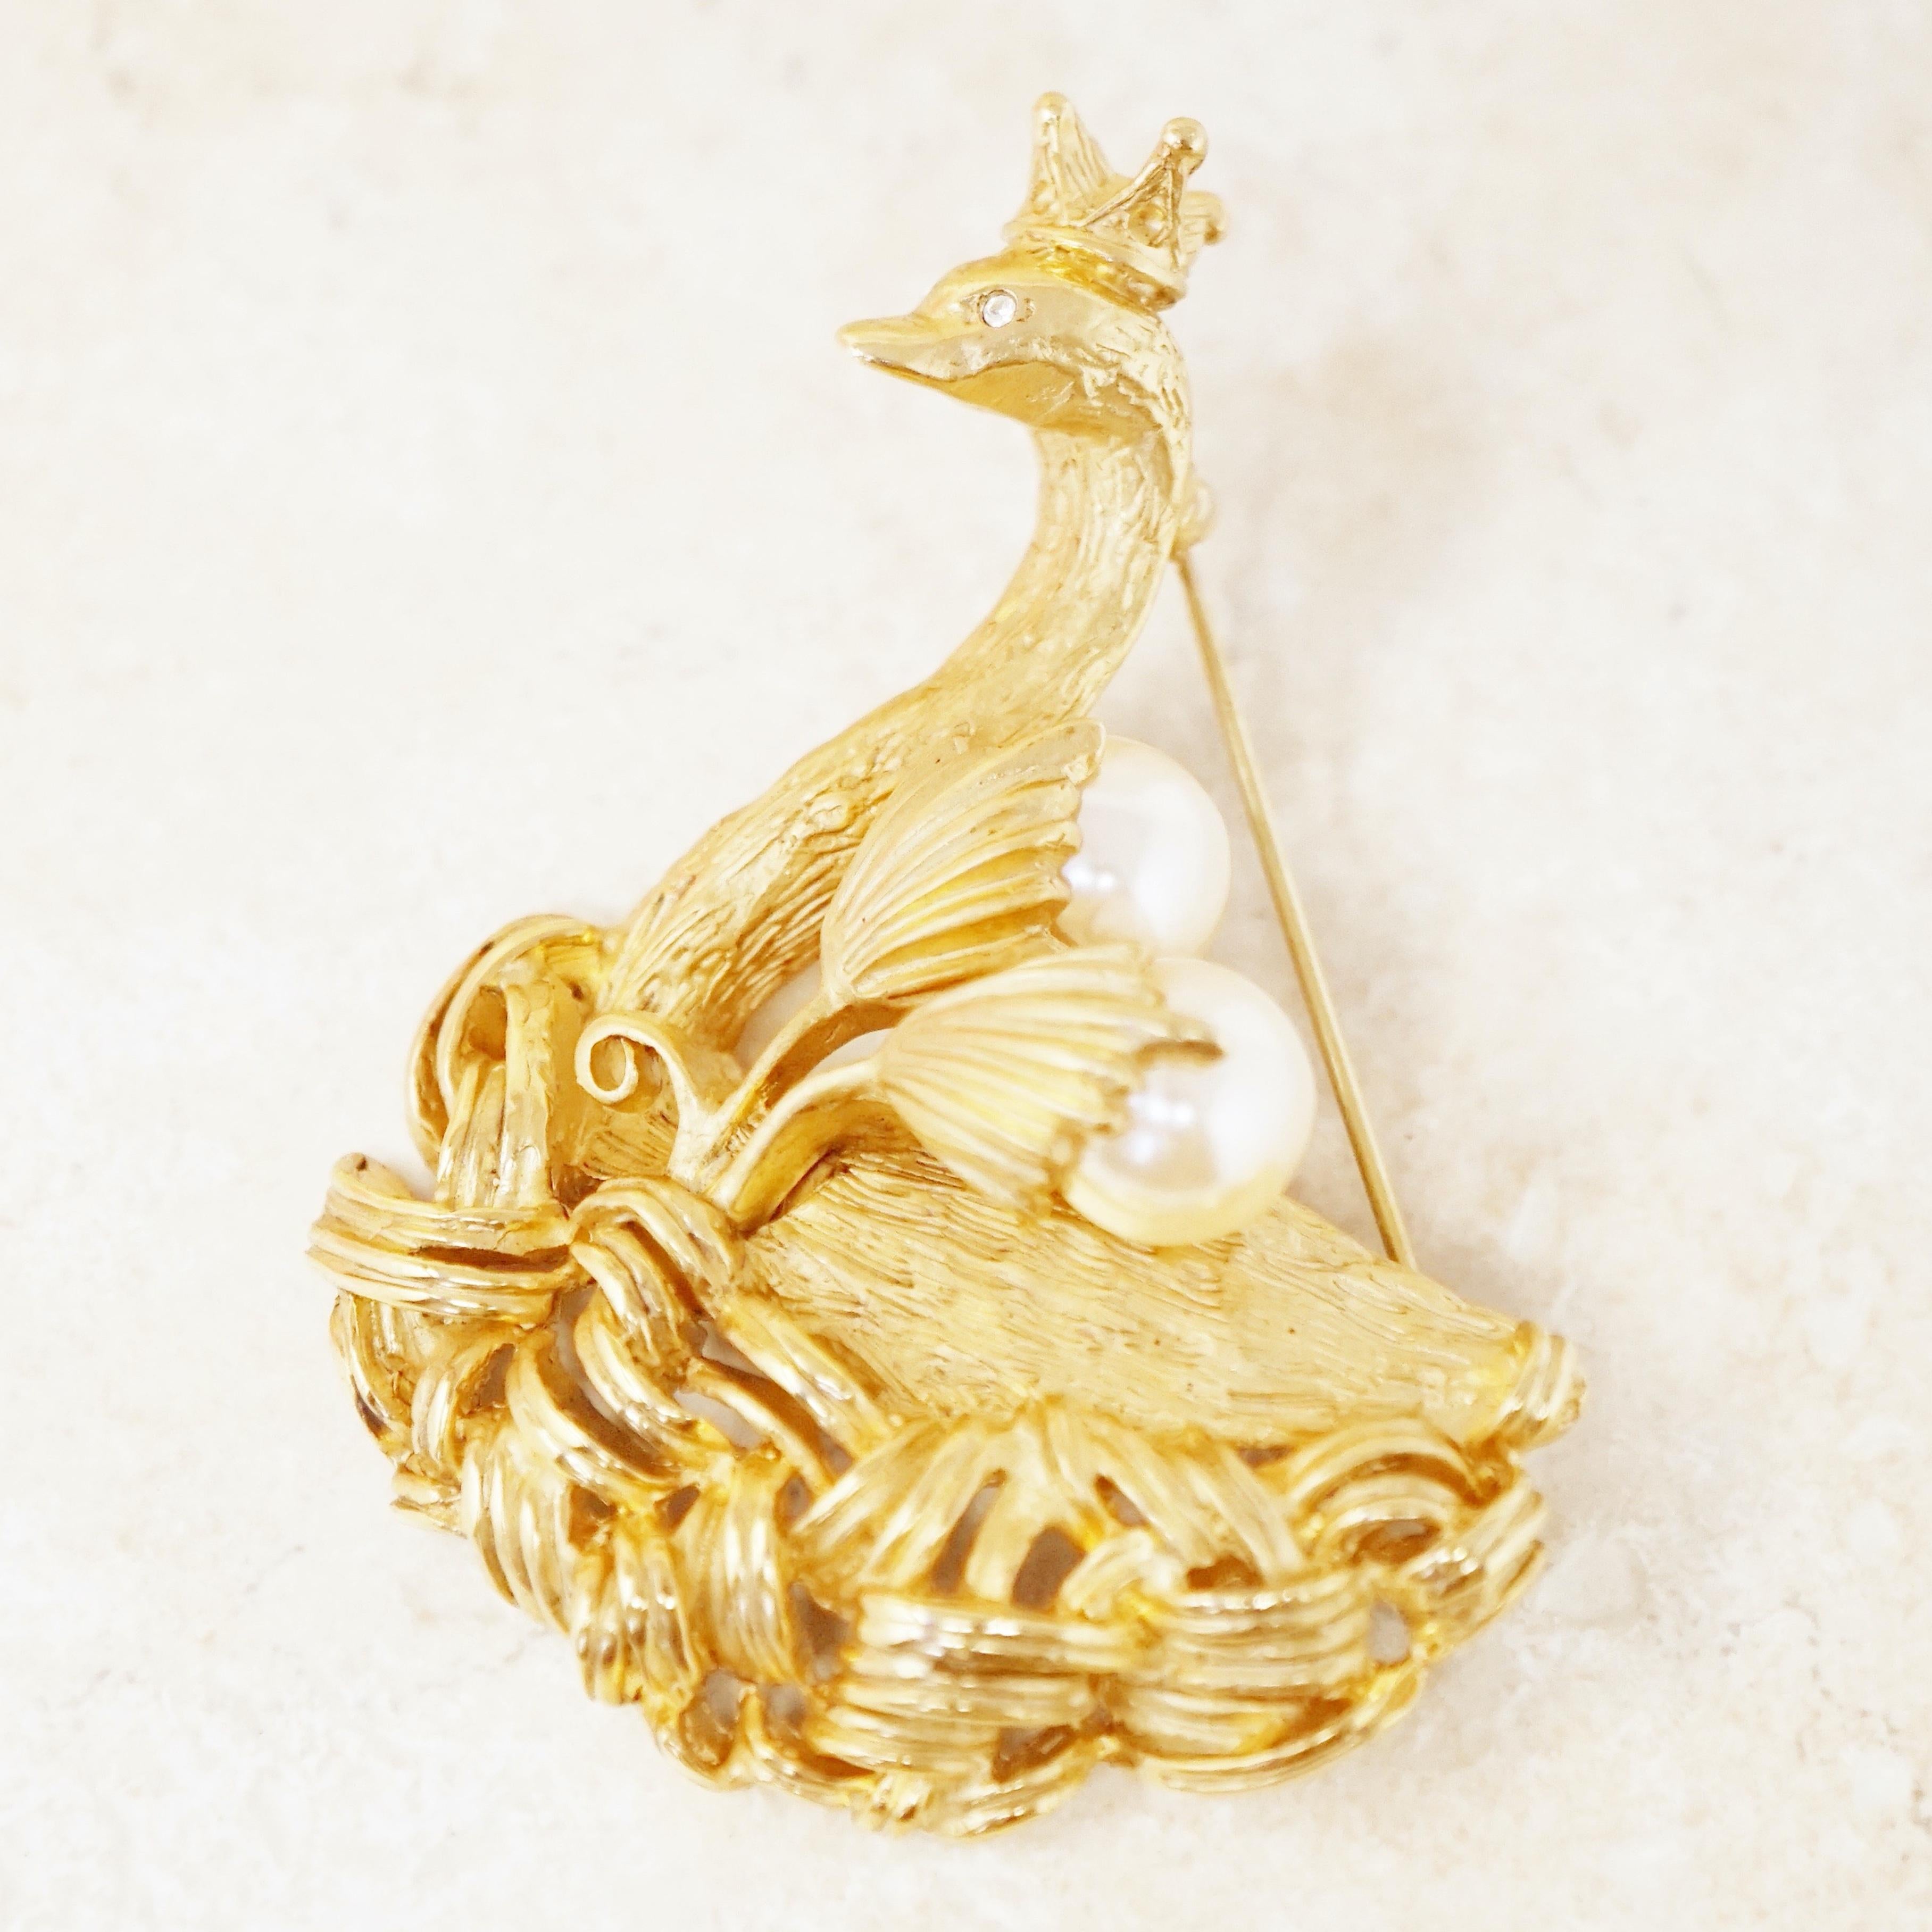 Vintage Gilded Swan Princess Figural Brooch by Erwin Pearl, 1990s In Excellent Condition For Sale In McKinney, TX